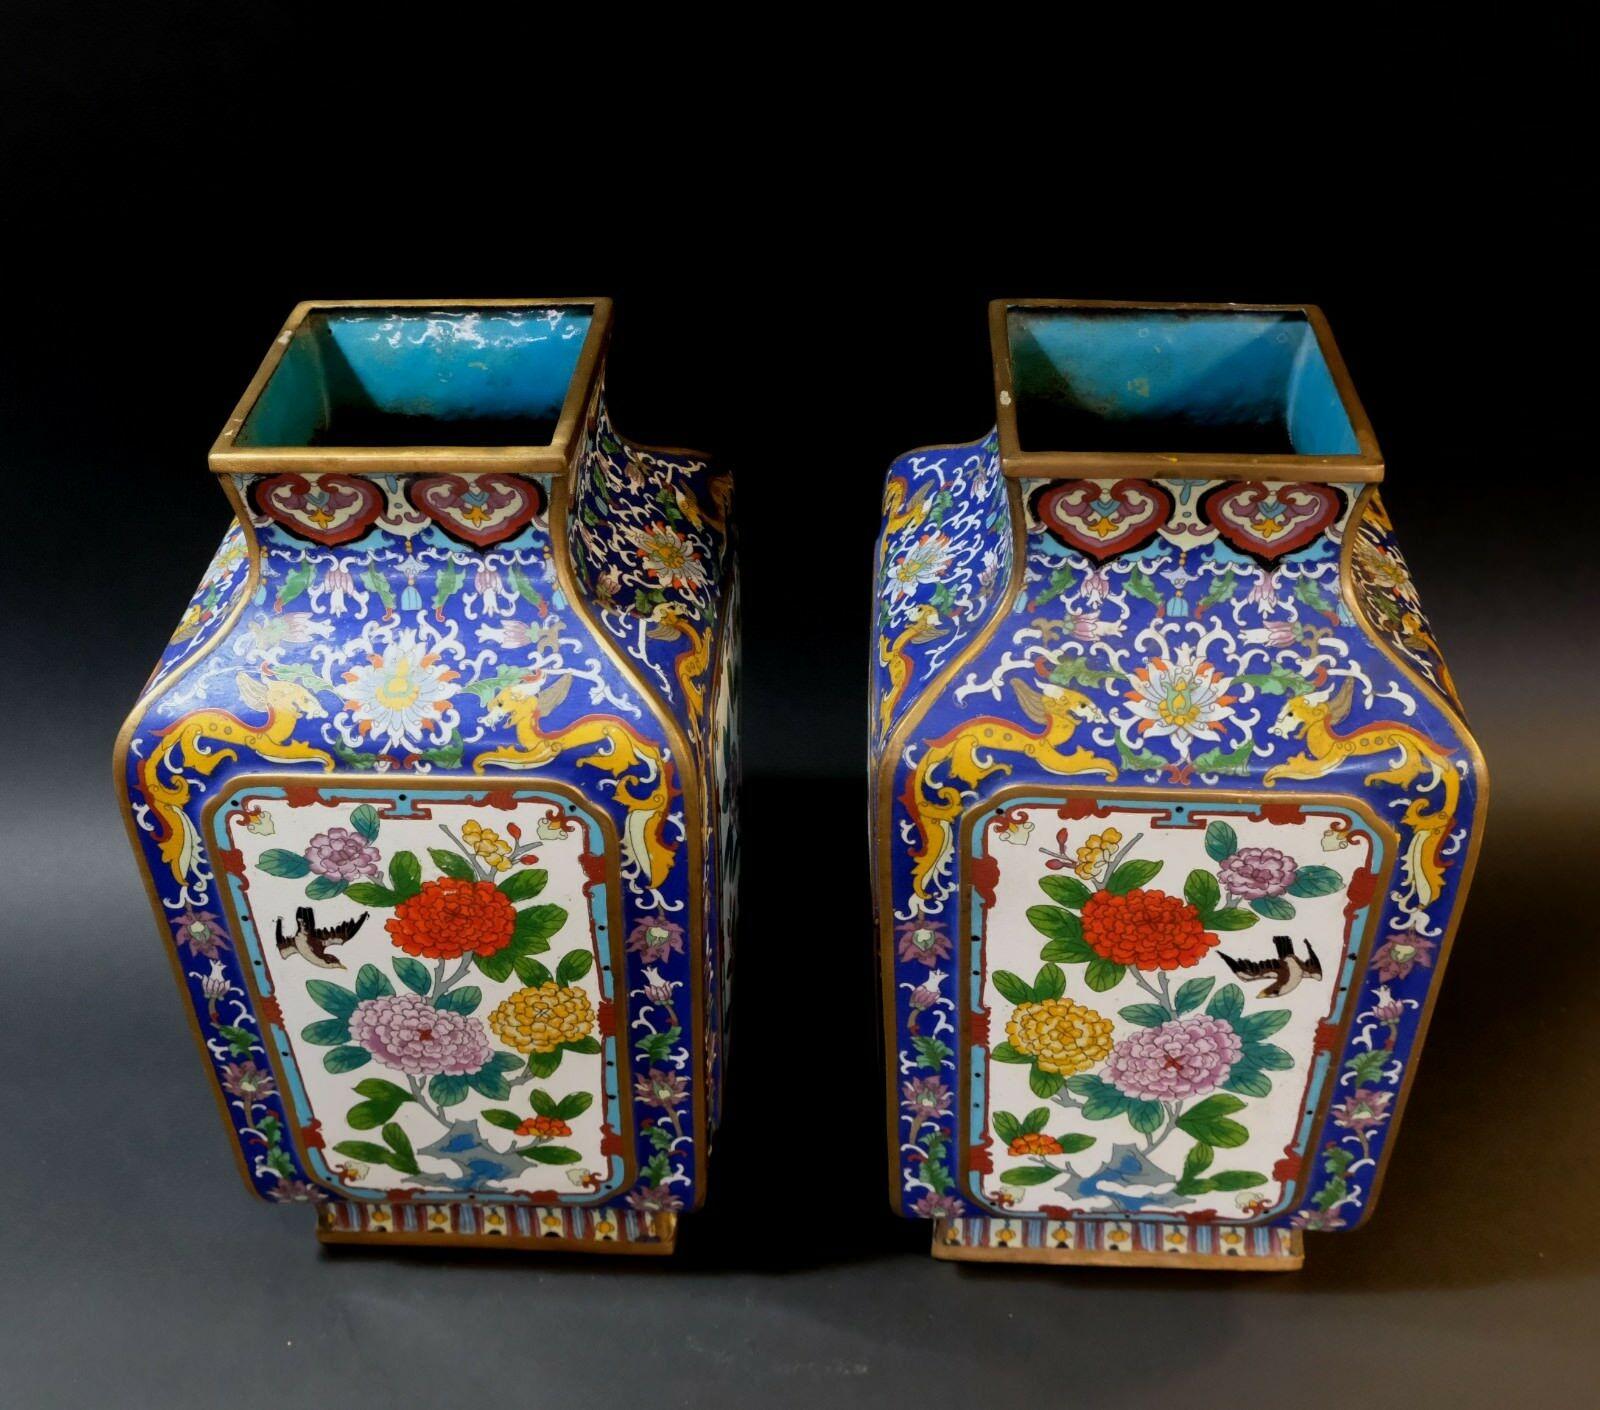 Quality work, large & heavy matching pair of chinese bronze cloisonné enameled vases. Of squared four-panel form, each panel with raised scenes of birds and florals on a blue ground with dragons and interlocking foliage.